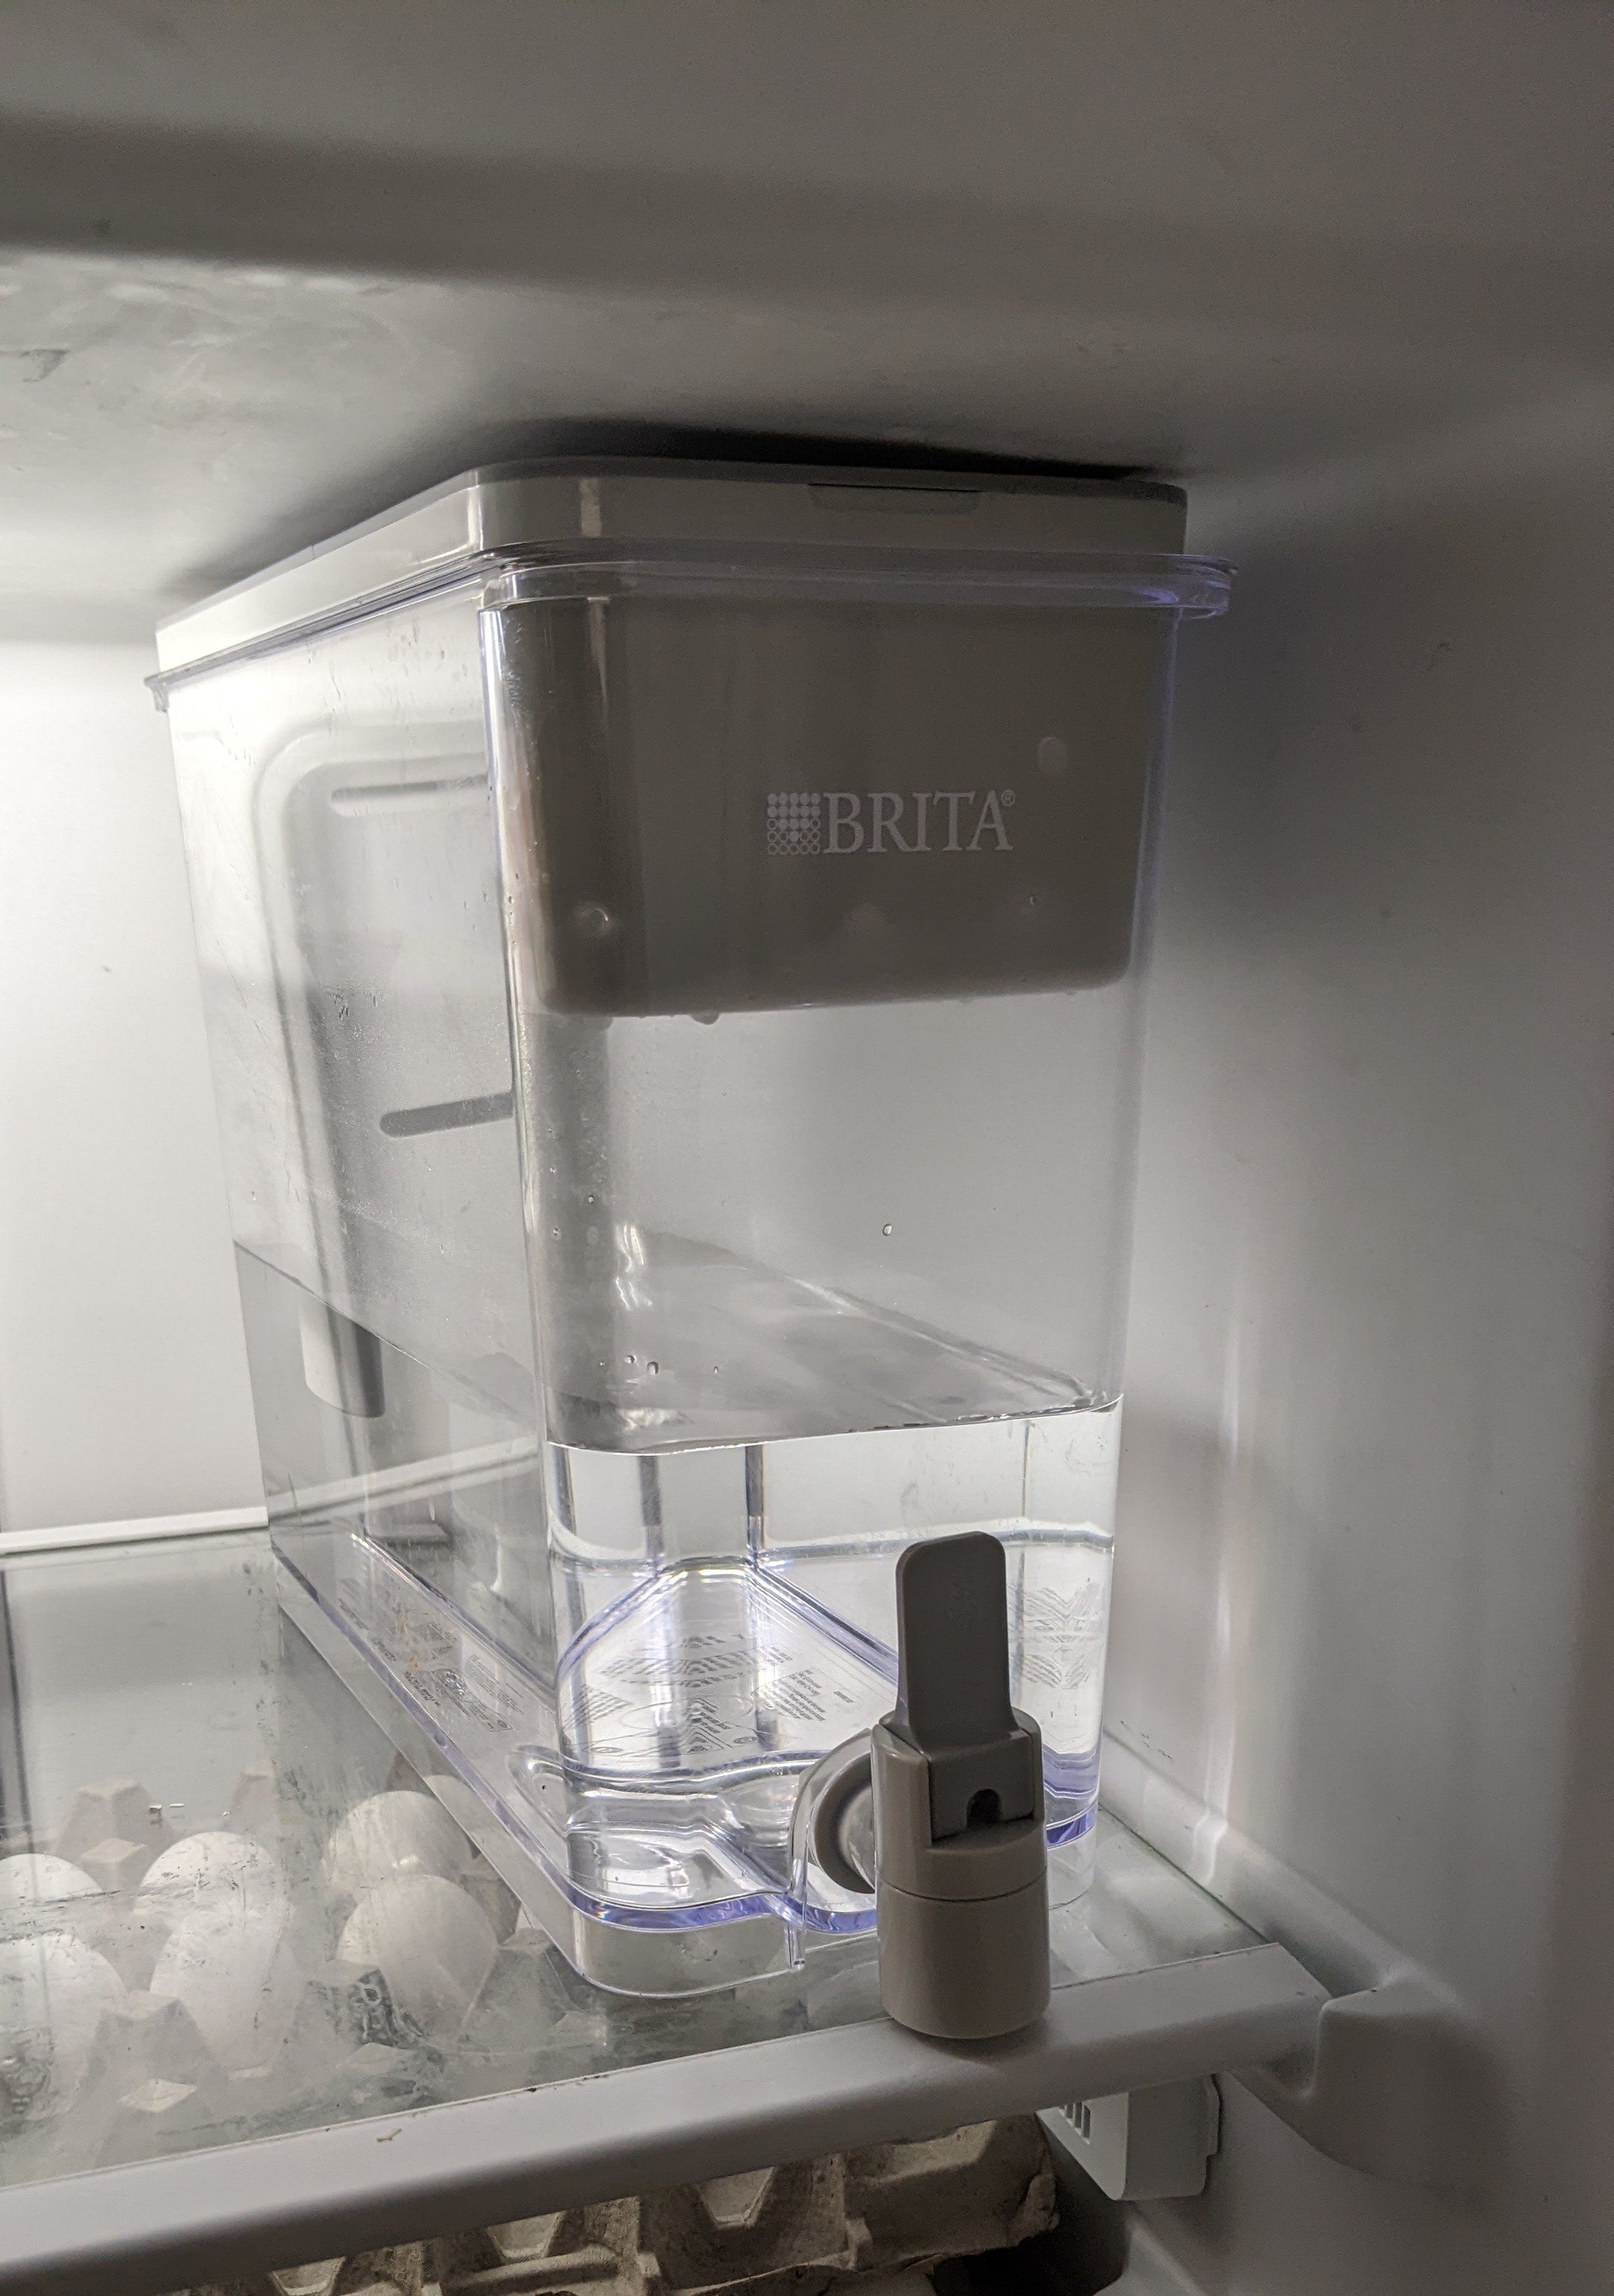 A large water dispenser on the top shelf of a fridge